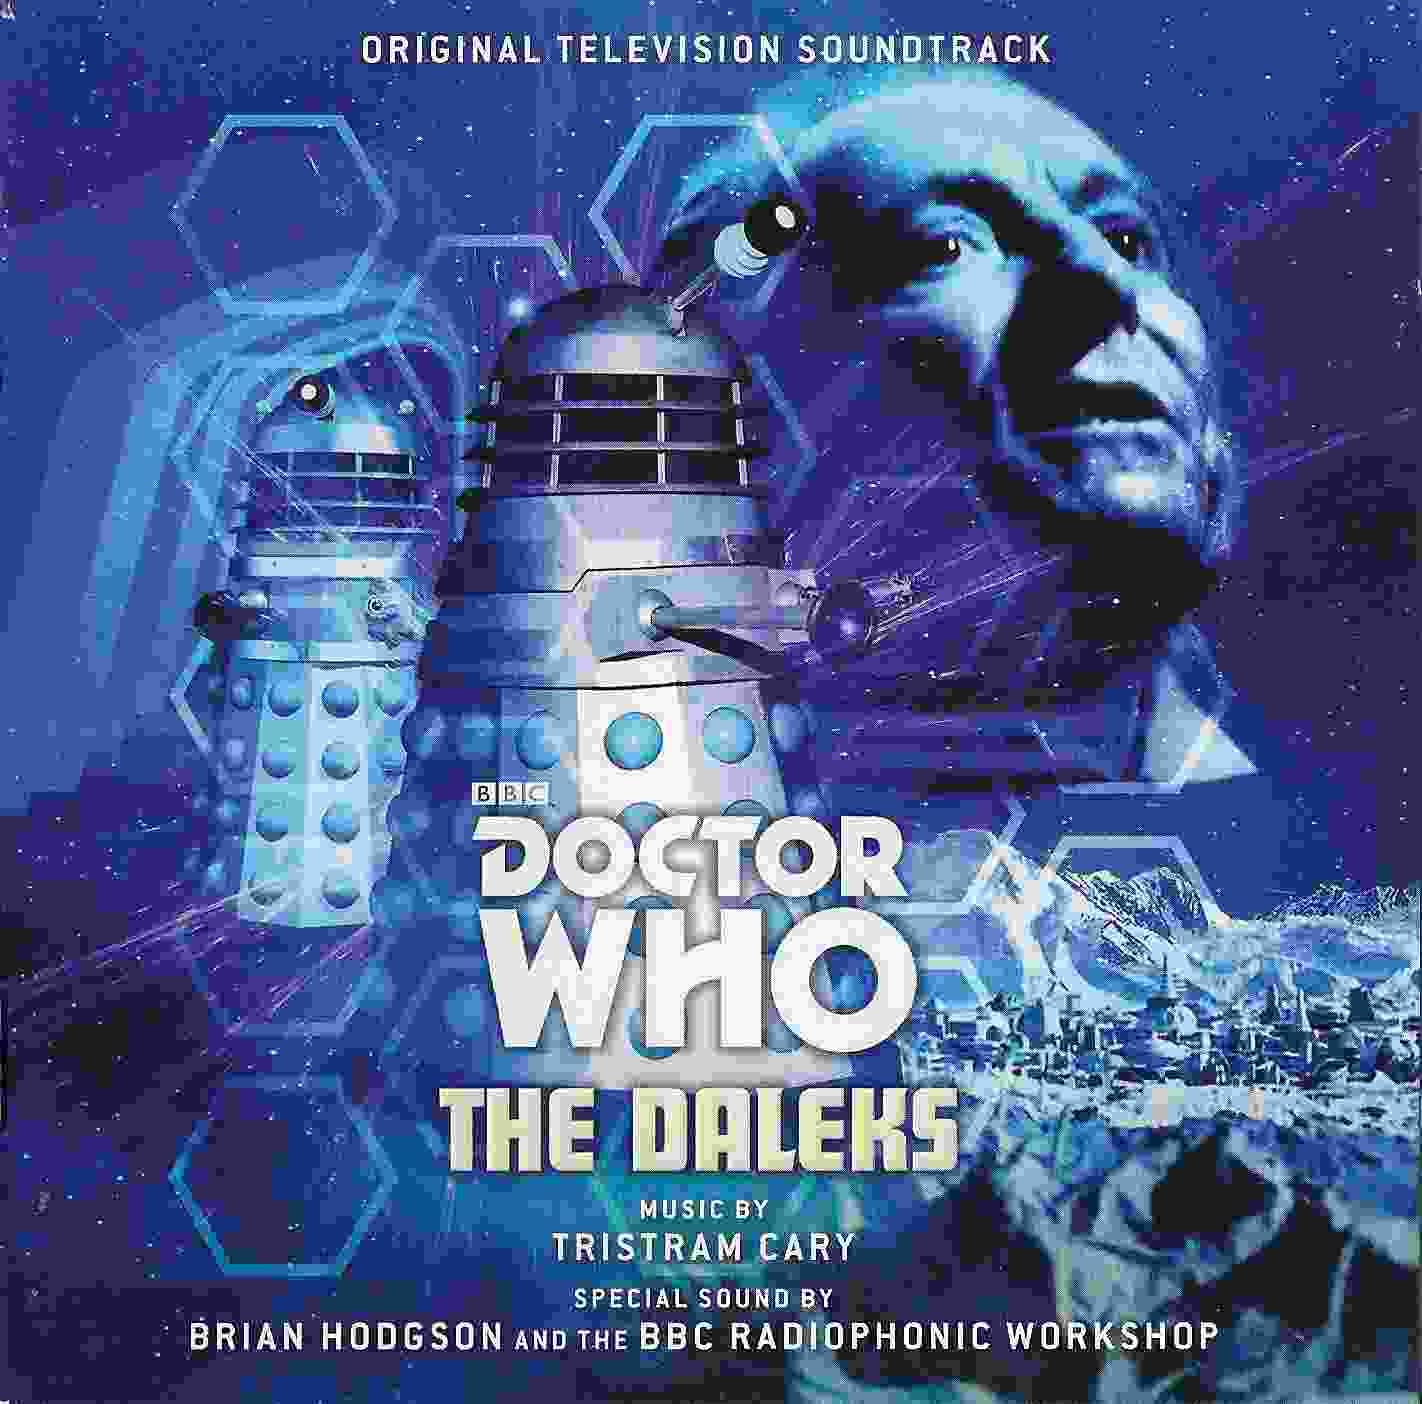 Picture of Doctor Who - The Daleks by artist Tristram Cary from the BBC cds - Records and Tapes library